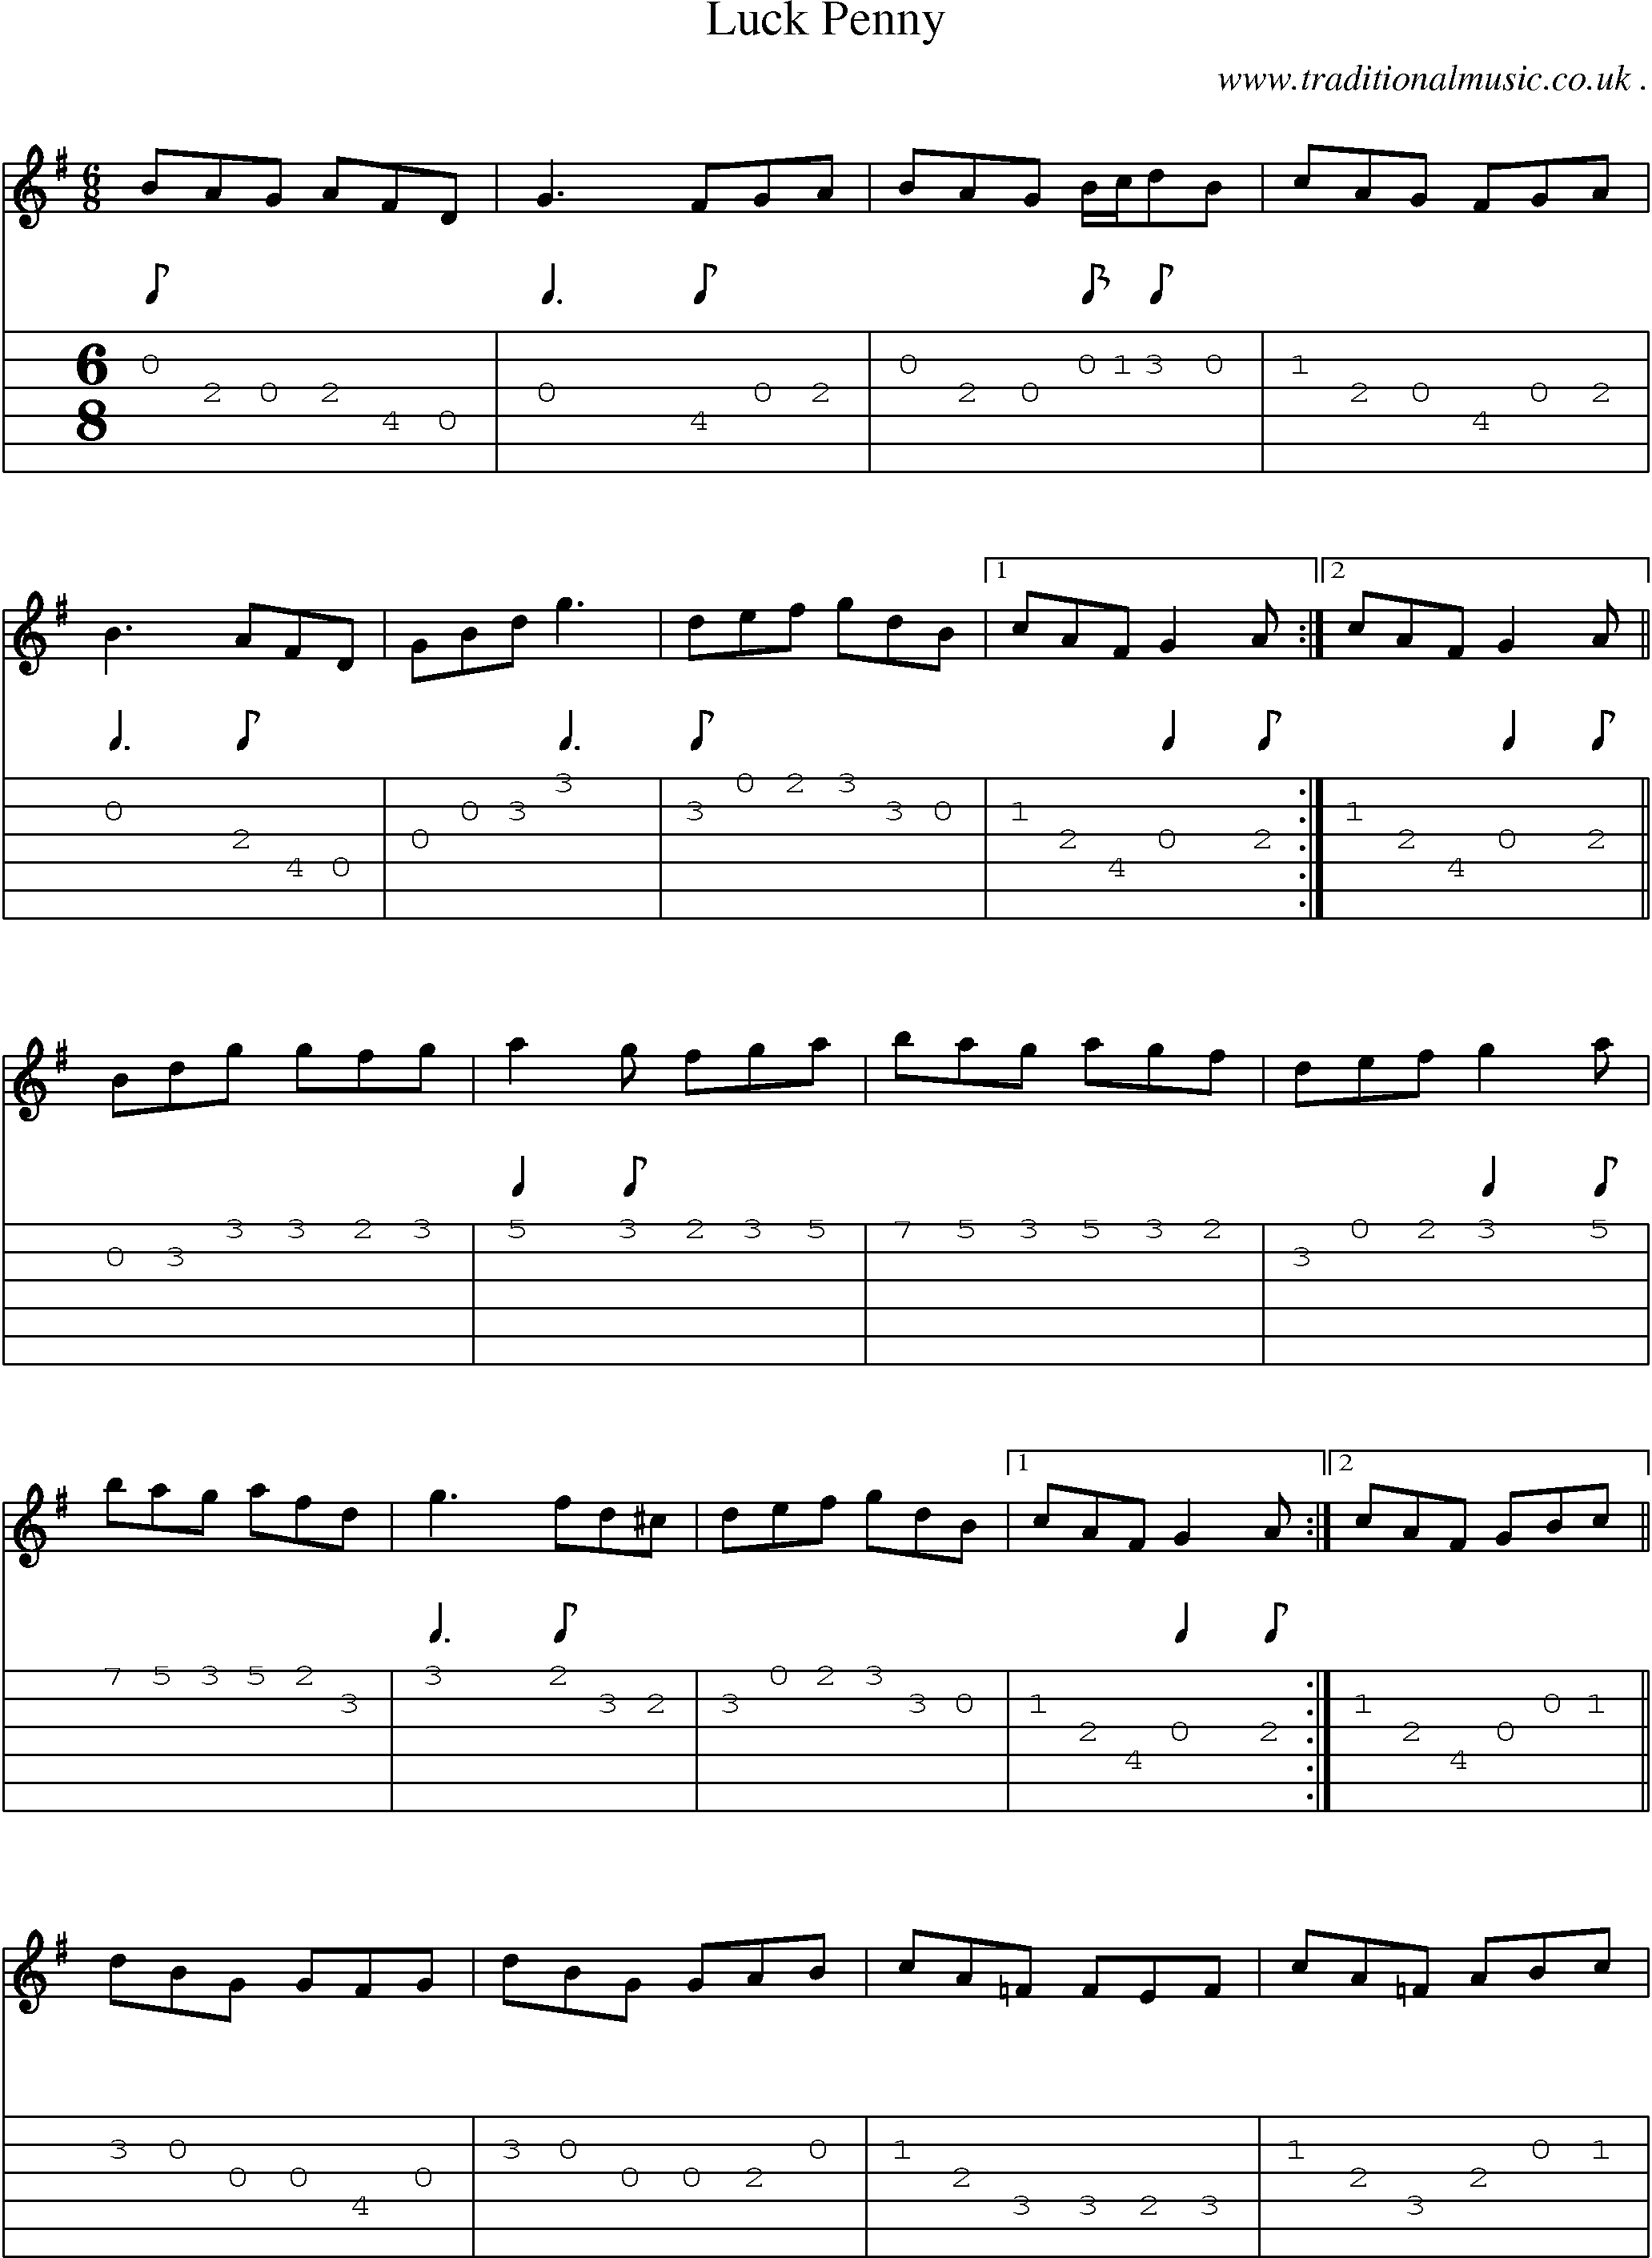 Sheet-Music and Guitar Tabs for Luck Penny